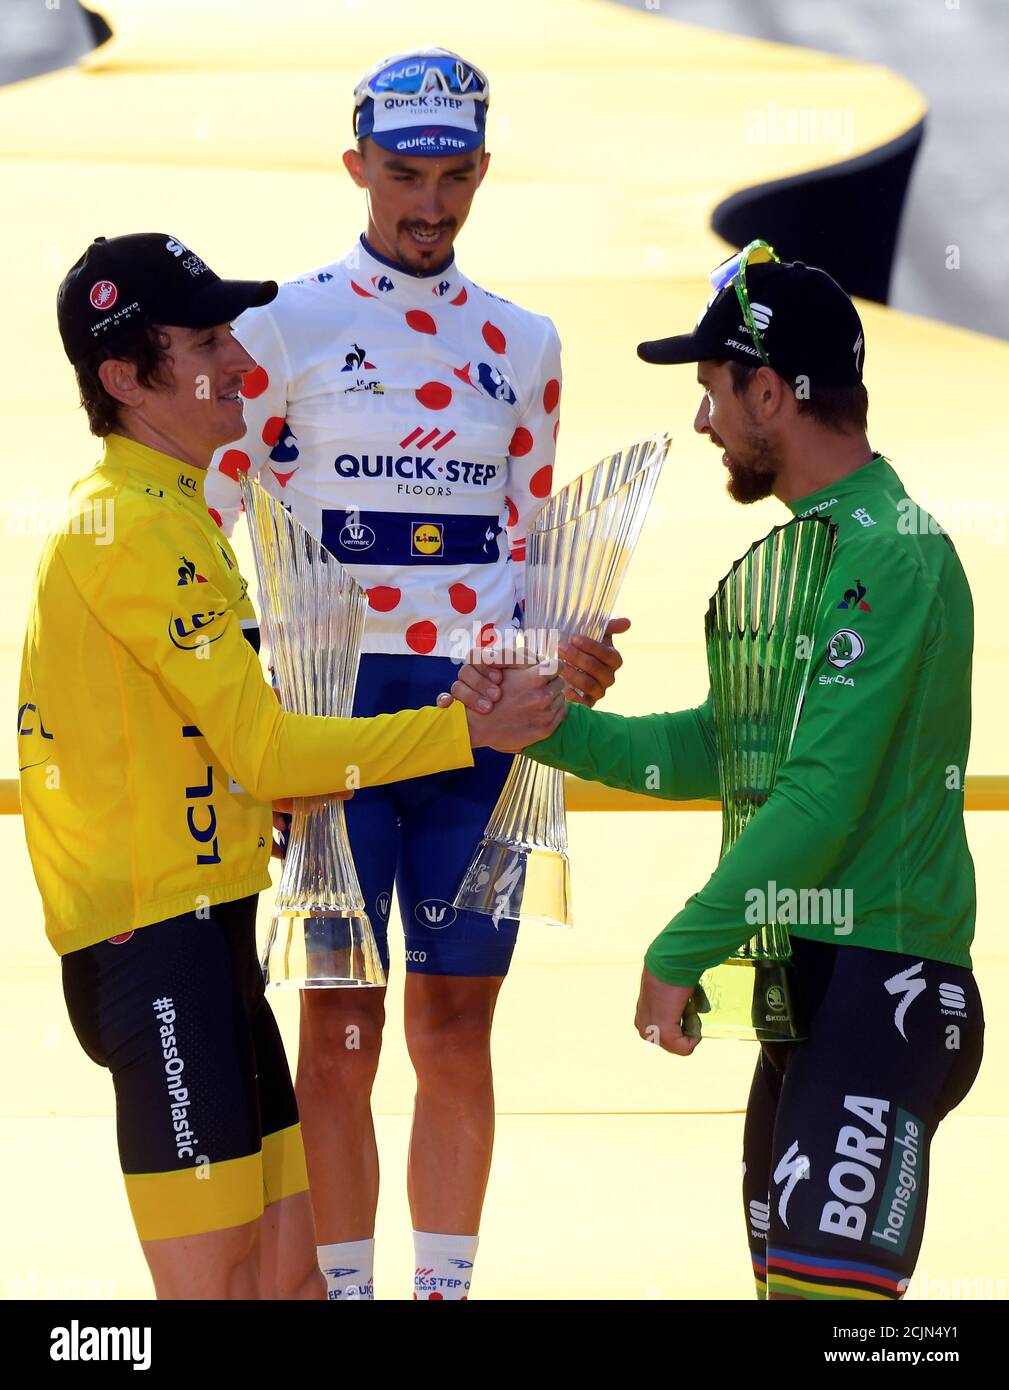 Cycling - Tour de France - The 116-km Stage 21 from Houilles to Paris Champs-Elysees - July 29, 2018 - BORA-Hansgrohe rider Peter Sagan of Slovakia, wearing the green jersey as winner of the points classification, congratulates overall winner Team Sky rider Geraint Thomas of Britain on the podium, as Quick-Step Floors rider Julian Alaphilippe of France, wearing the polka-dot jersey as winner of the mountains classification, looks on. Stephane Mantey/Pool via REUTERS Stock Photo